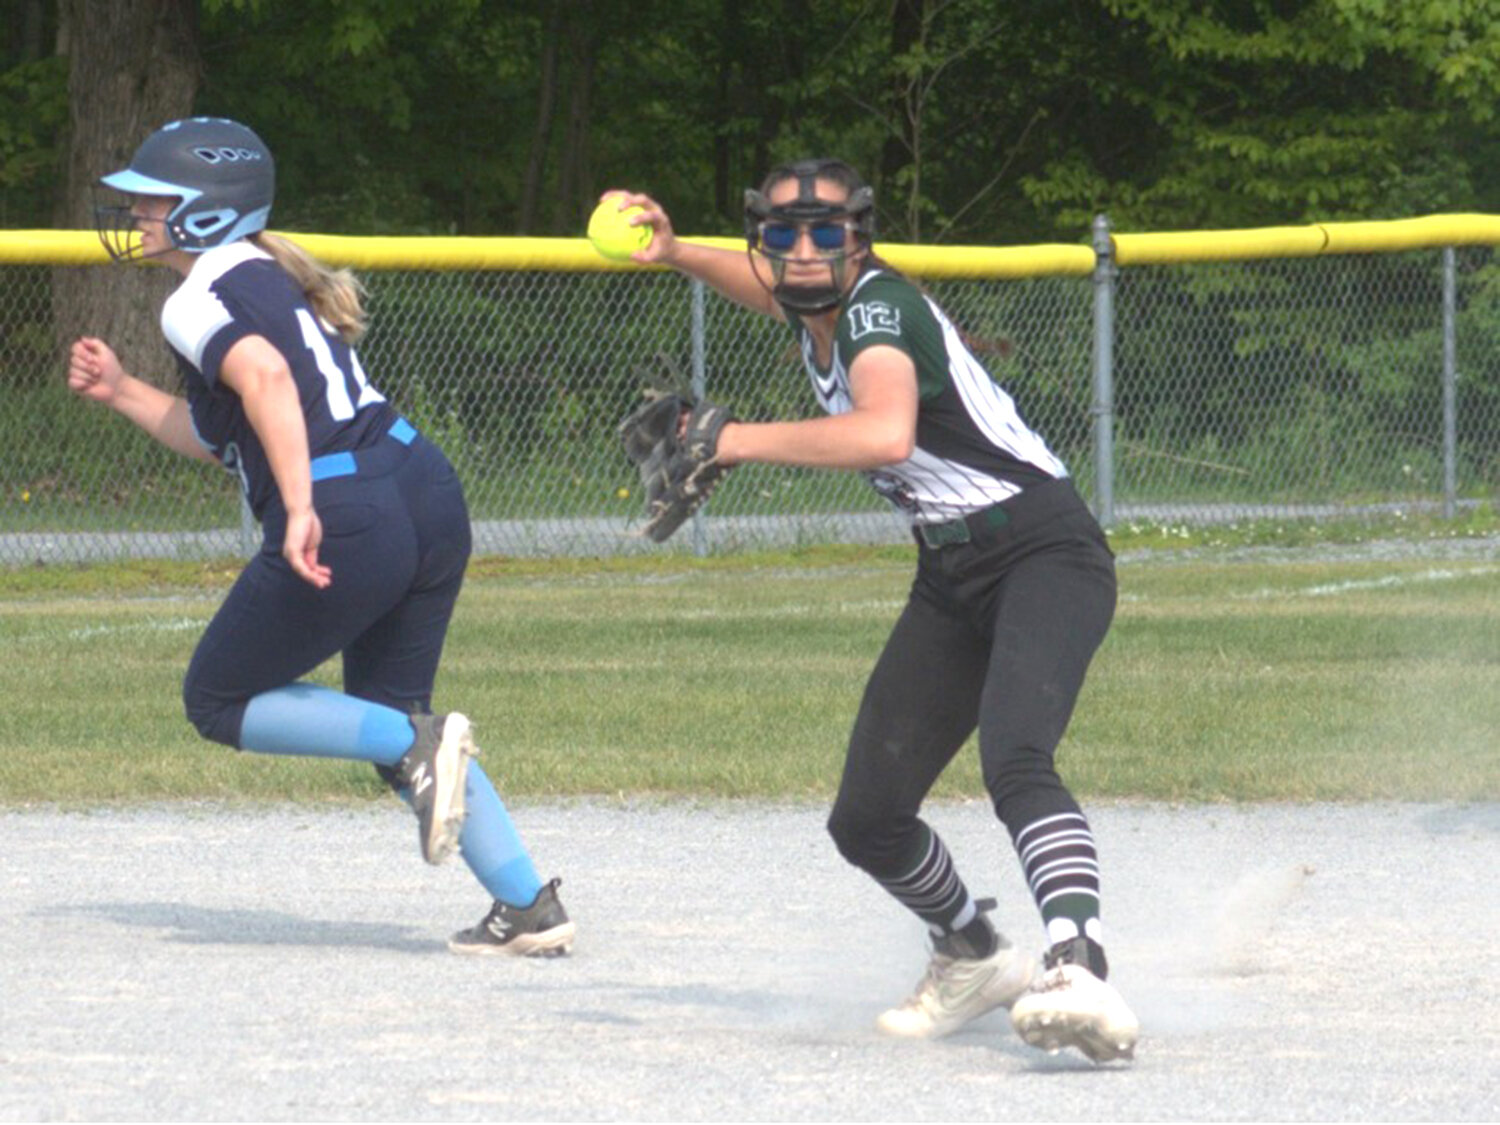 Adirondack infielder Kaitlyn Spann looks to throw to first as Central Valley Academy baserunner Brooke Burns tries to advance during Tuesday's Class B second round game in Boonville.